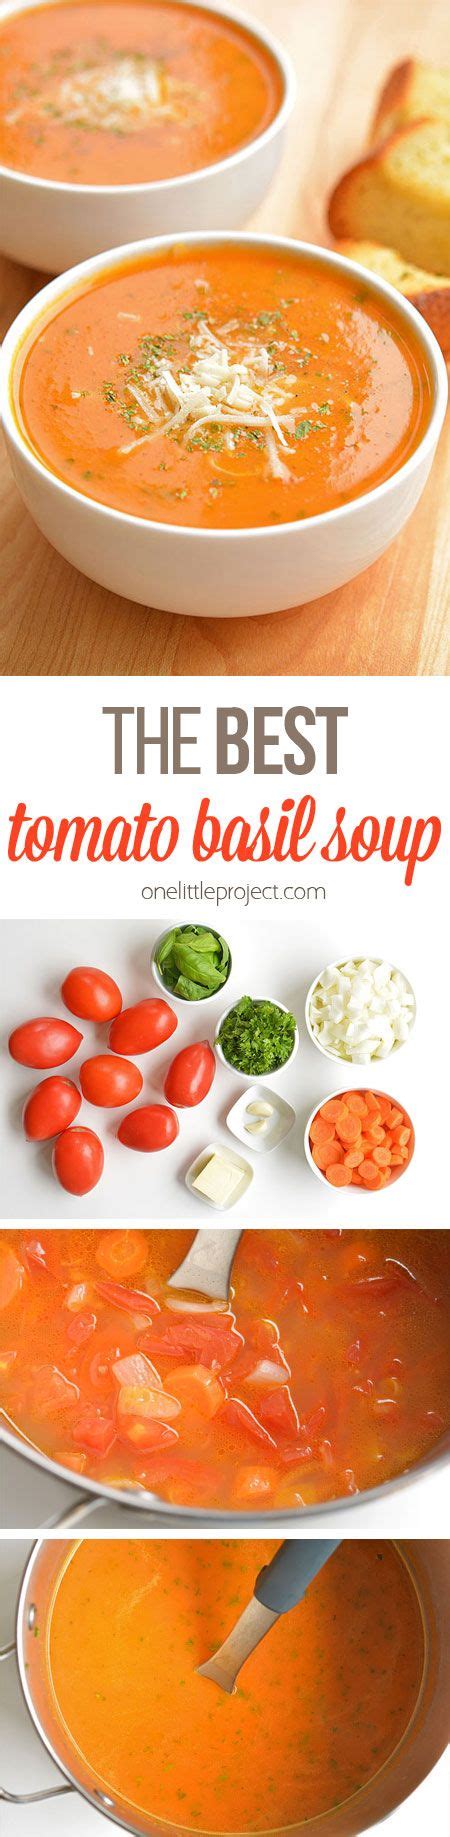 But if you want to, we have plenty of ideas. The BEST Homemade Soups Recipes - Easy, Quick and Yummy ...